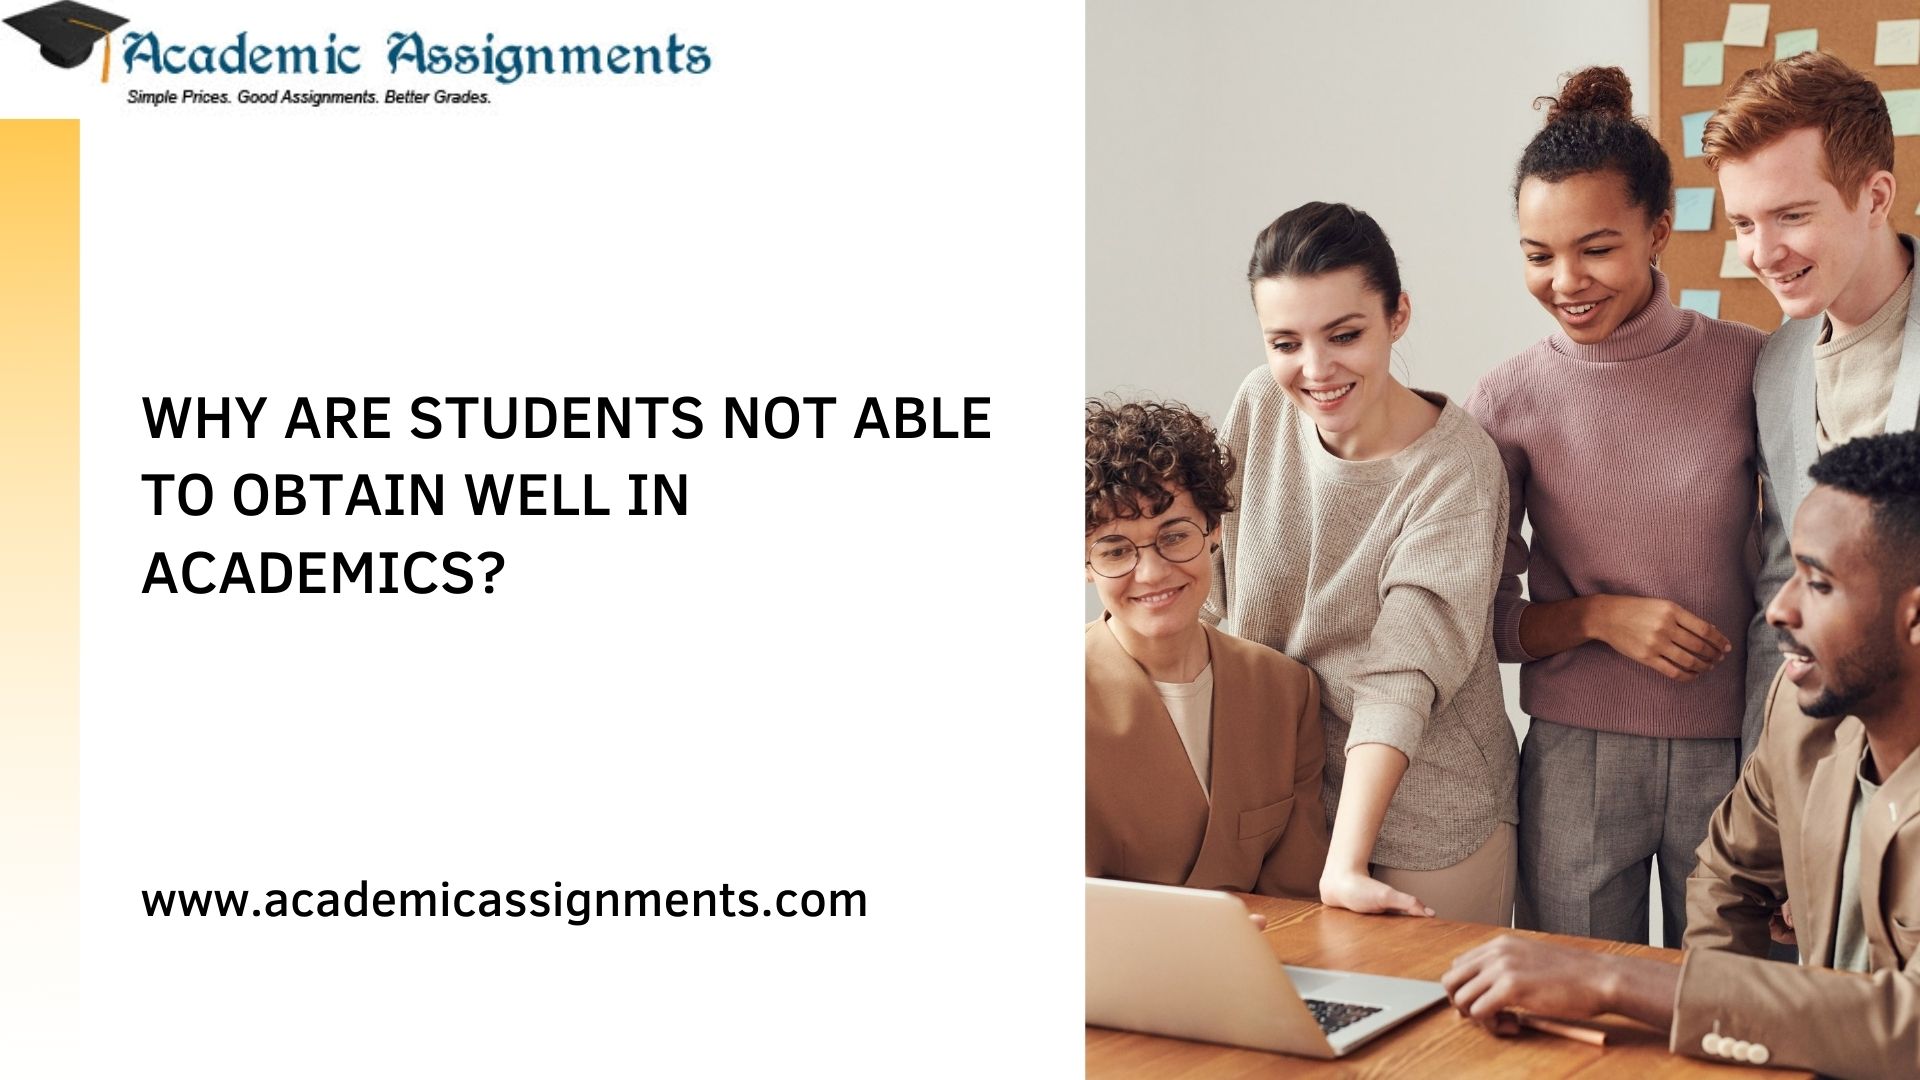 WHY ARE STUDENTS NOT ABLE TO OBTAIN WELL IN ACADEMICS